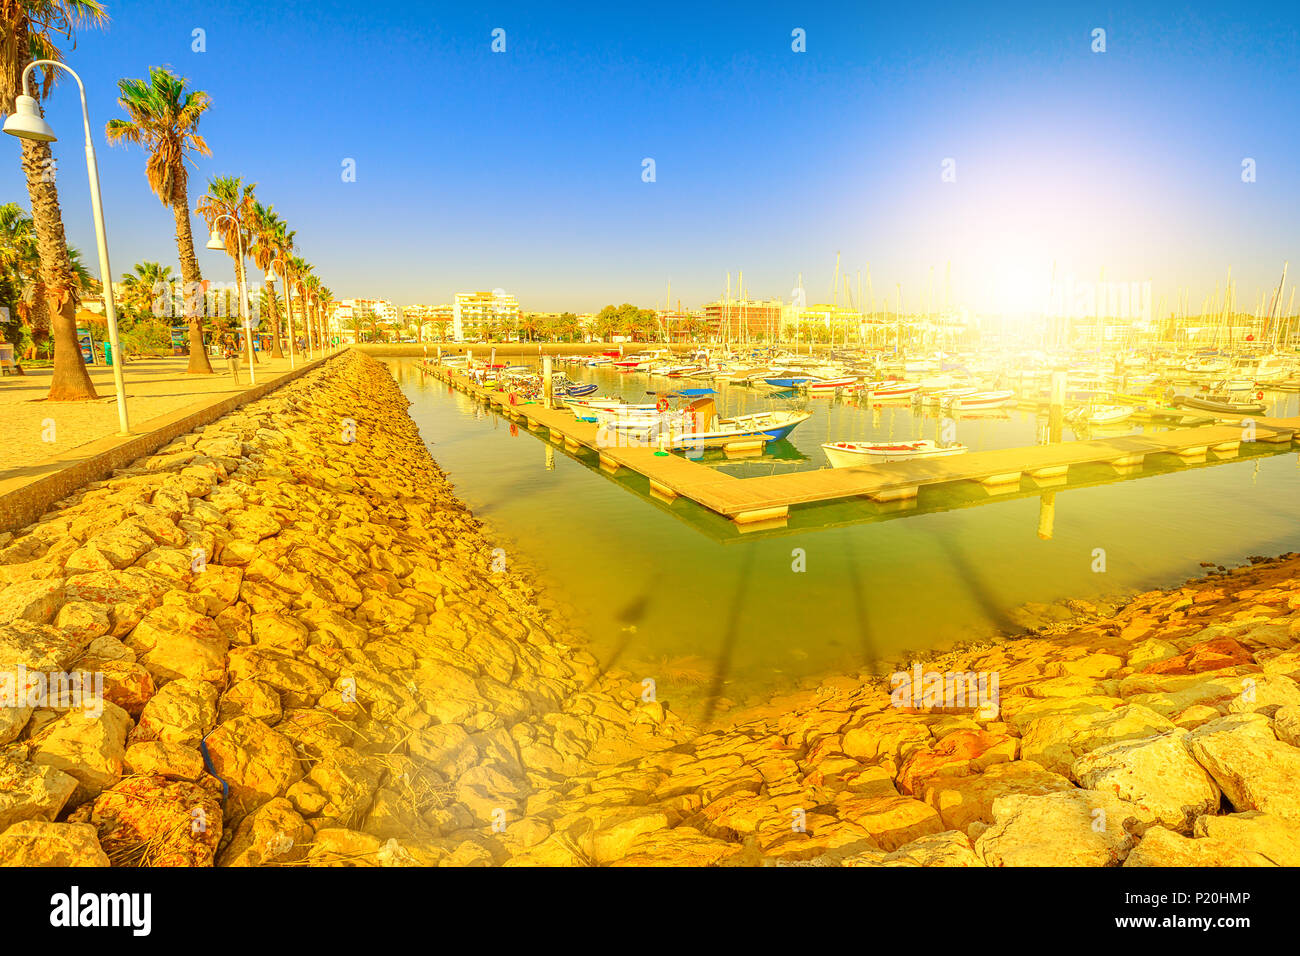 Panorama of yacht and motor boats in Marina de Lagos. The Marina is located in Bay of Lagos, Algarve coast, Portugal, Europe. Summer holidays. Sunset  Stock Photo